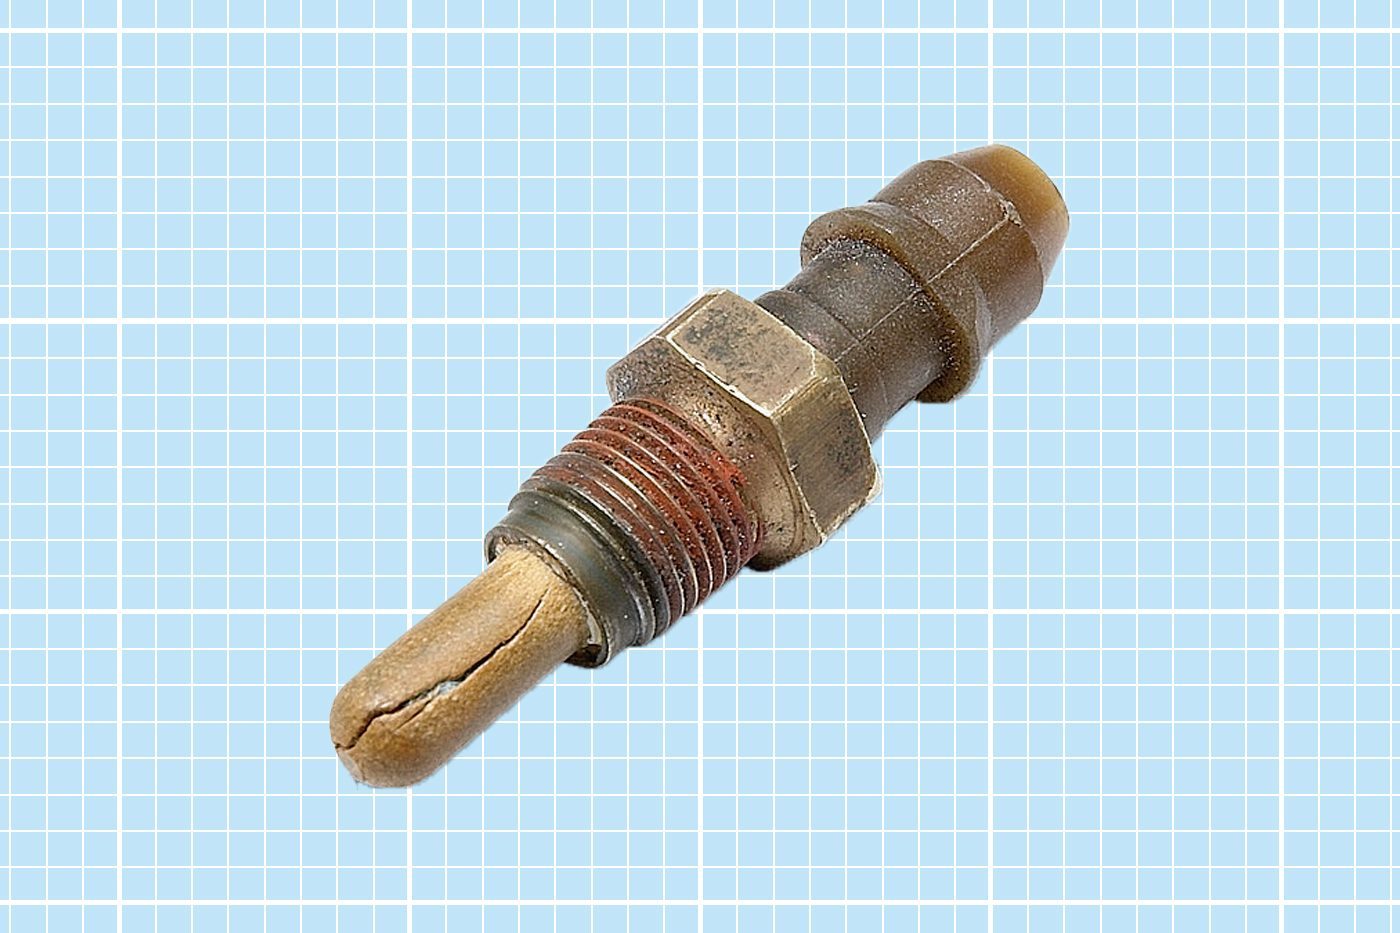 A worn, crack-filled engine ignition glow plug against a light blue graph paper background. The metallic component shows signs of heavy use, including rust and discoloration, and is used in diesel engines to assist in starting under low temperatures.